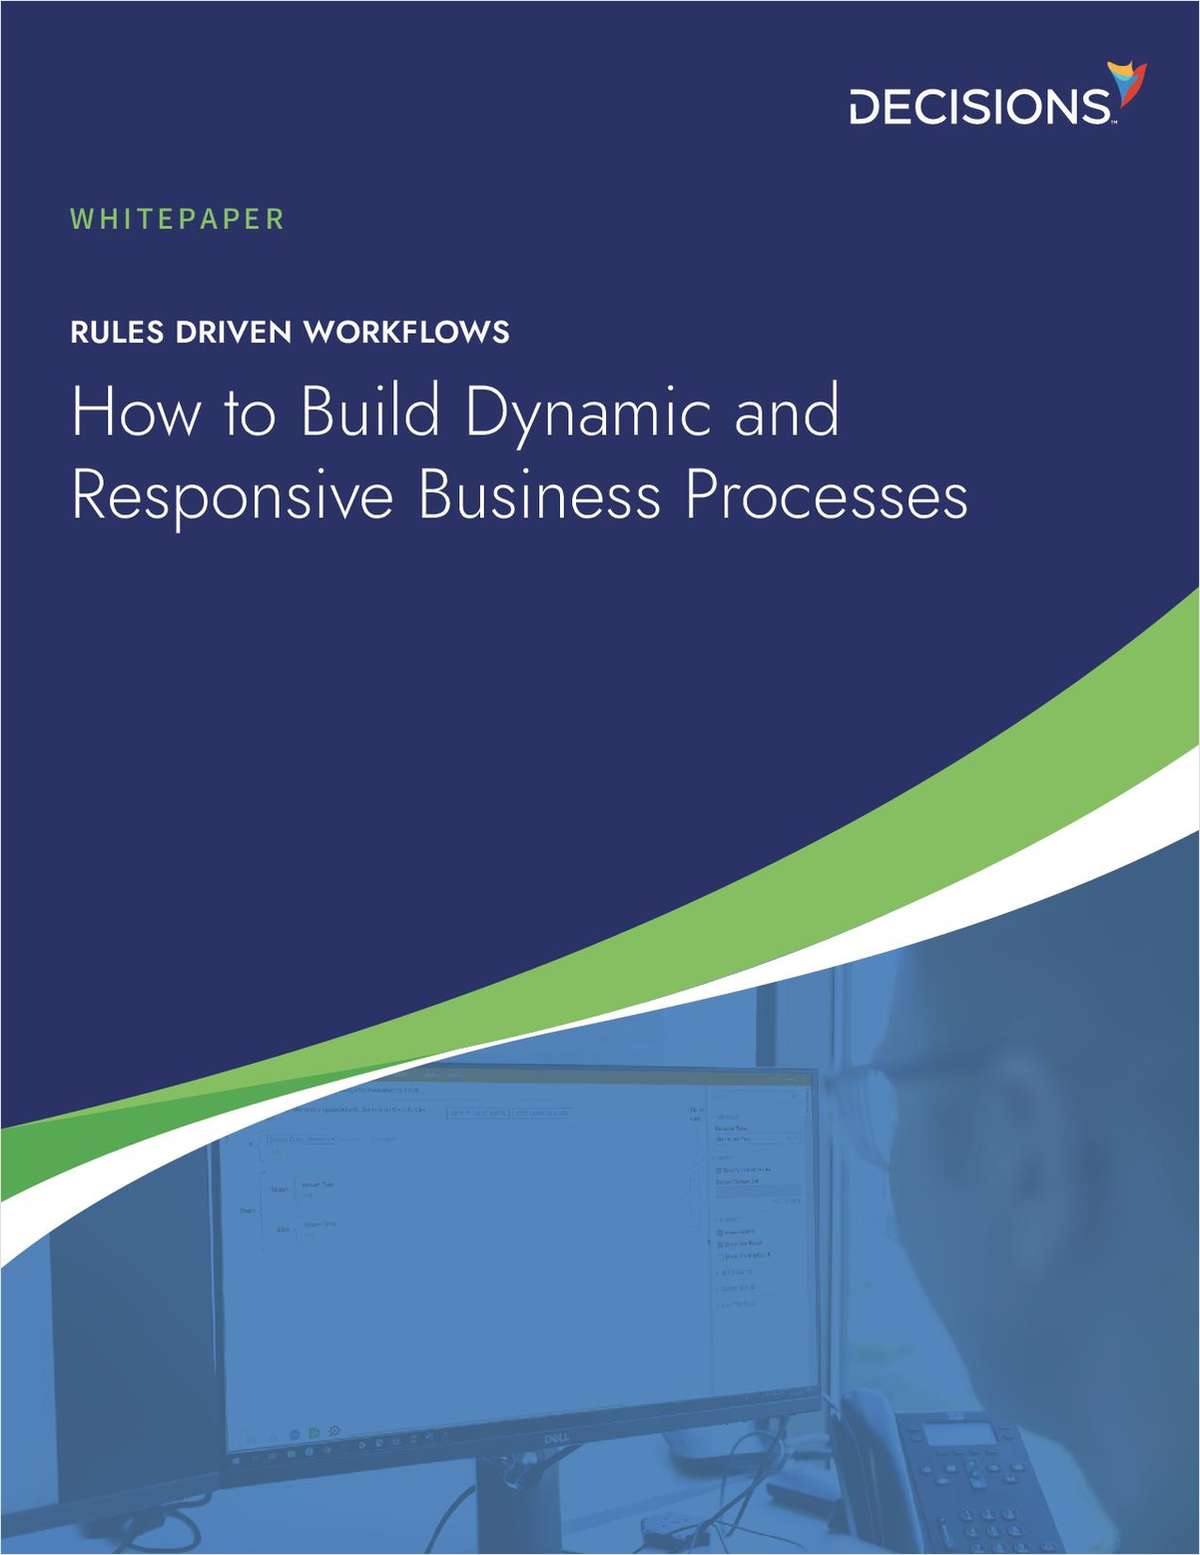 How to Build Dynamic and Responsive Business Processes